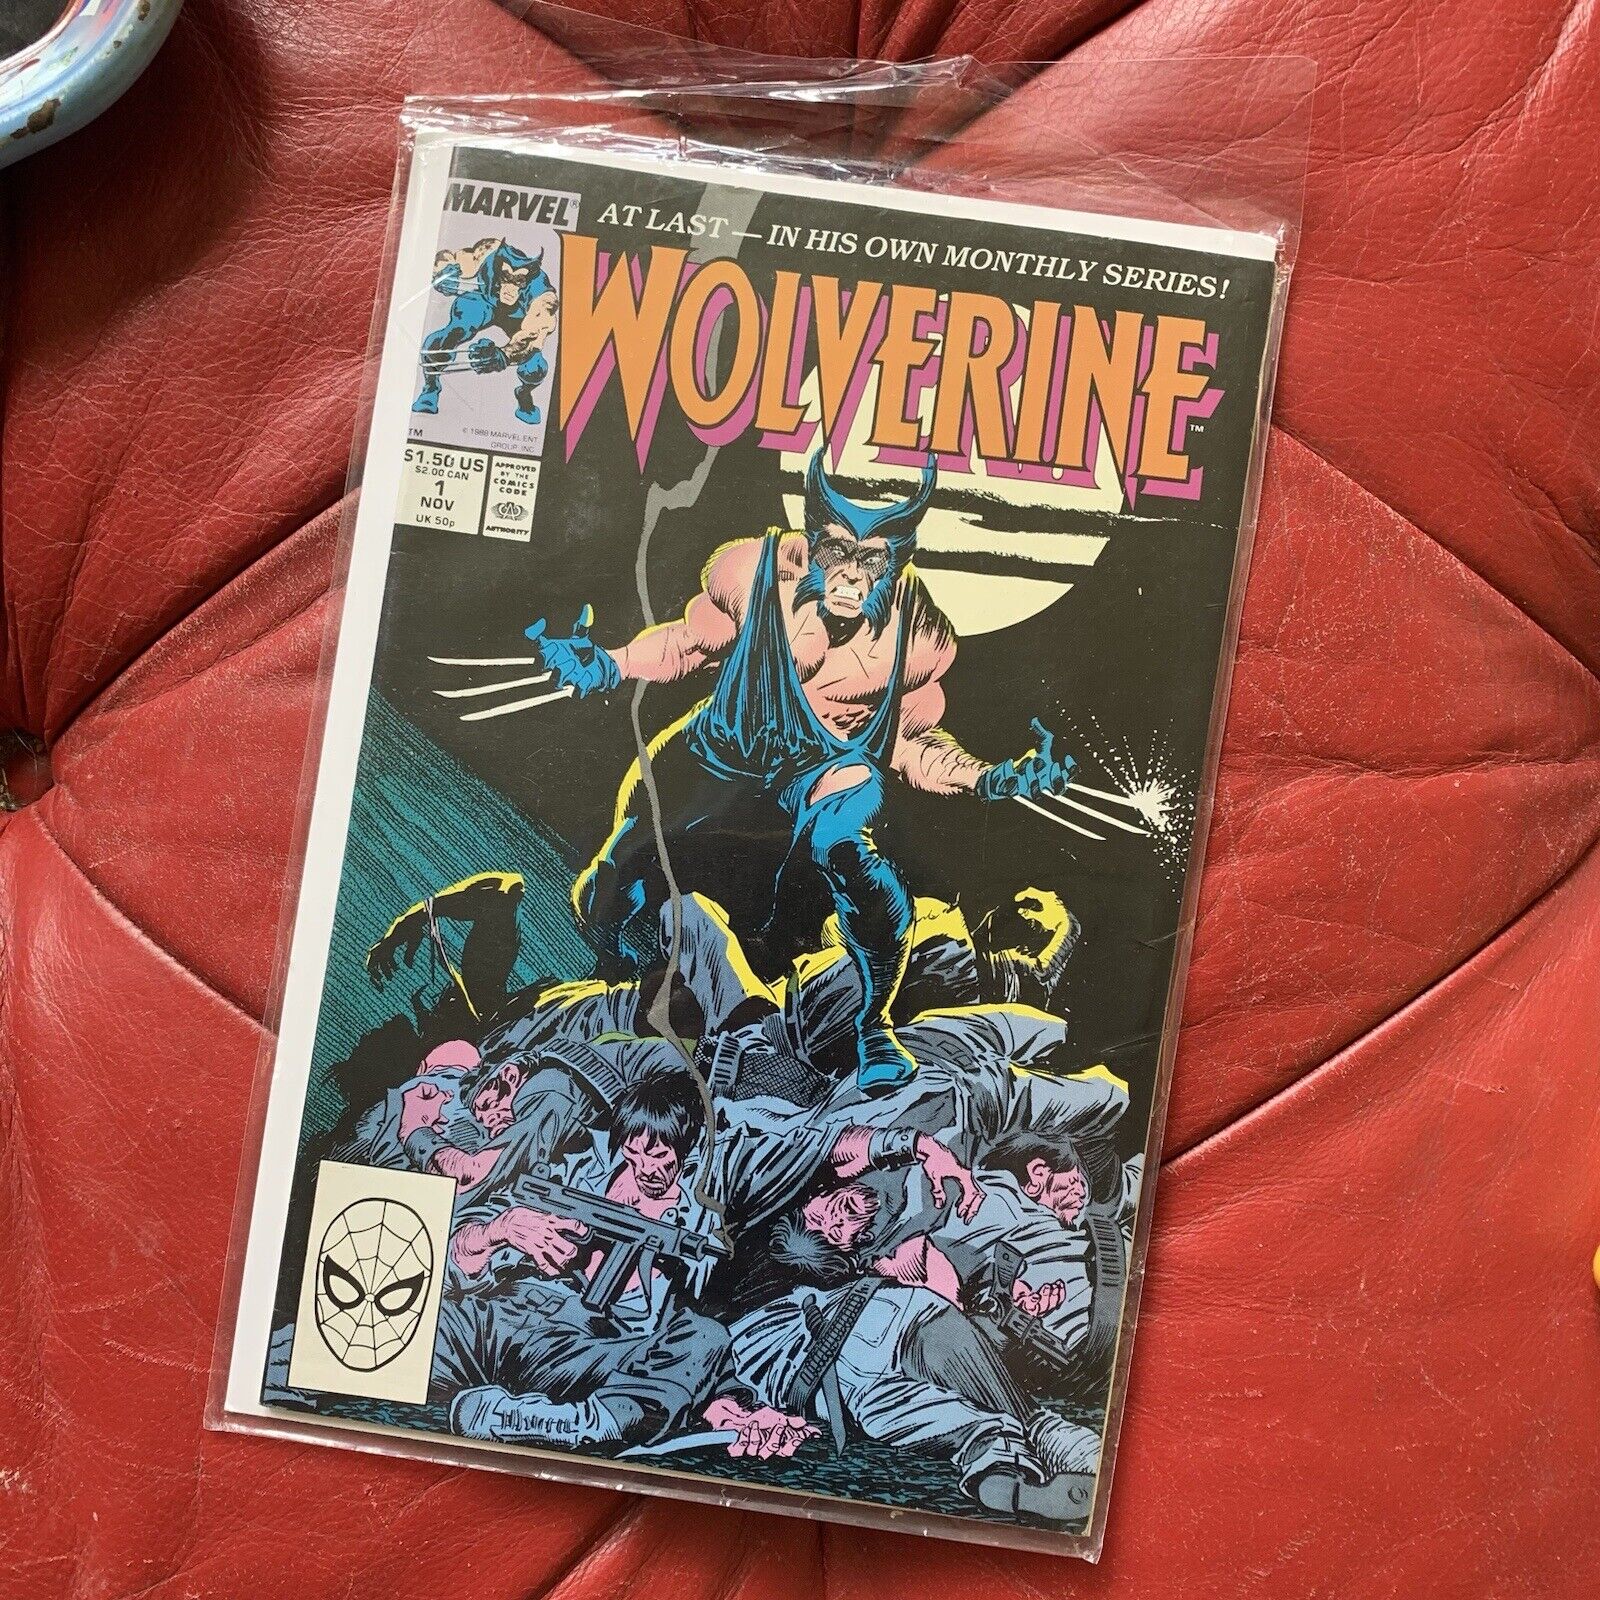 Wolverine #1 At Last In His Own Monthly Series, Marvel Comics Nov 1988 - Sealed